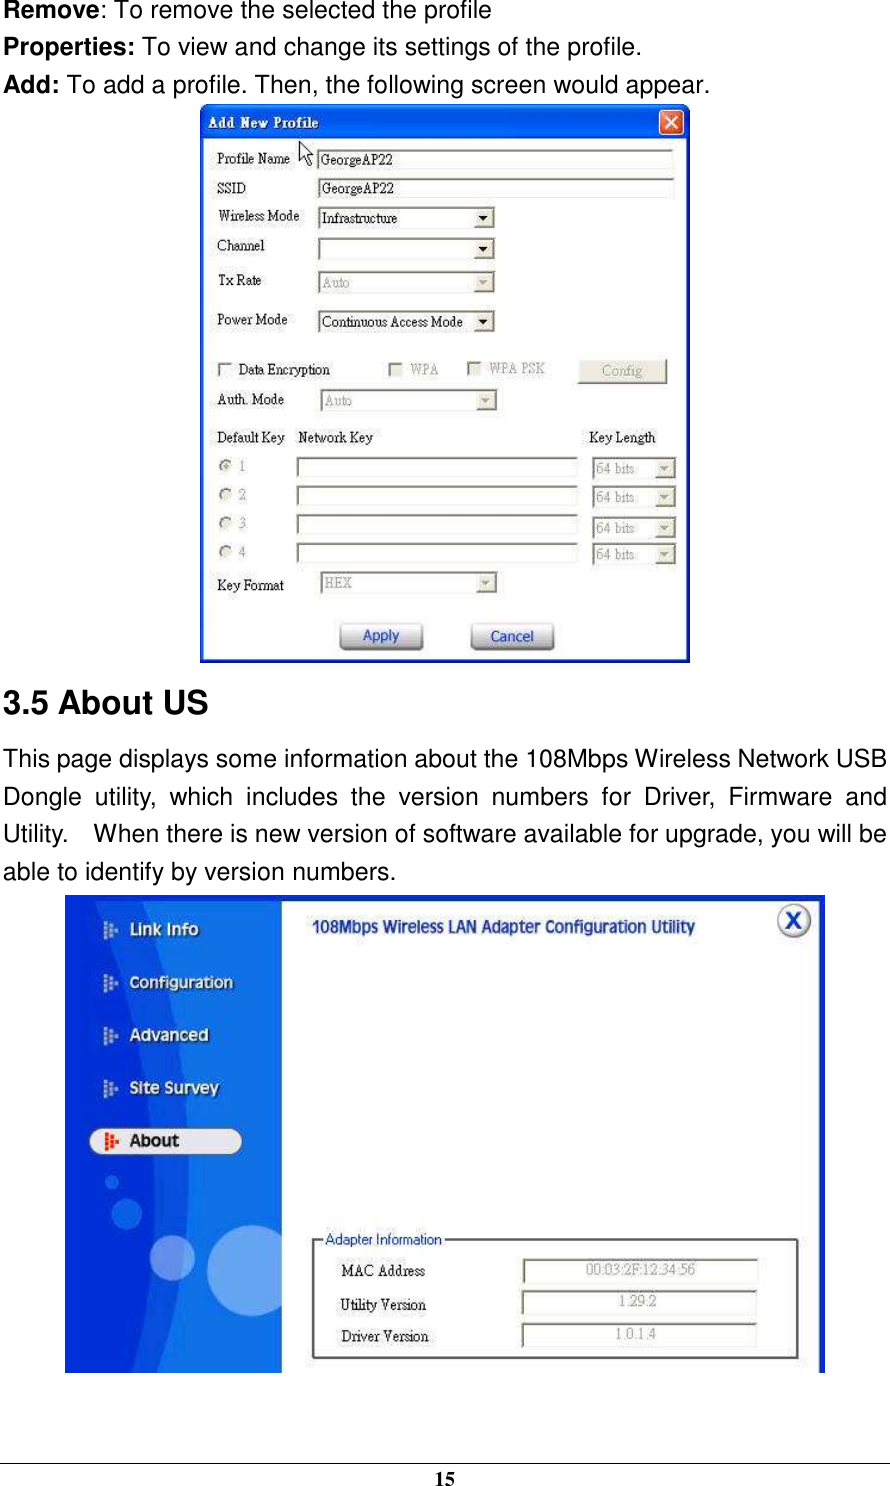  15 Remove: To remove the selected the profile Properties: To view and change its settings of the profile. Add: To add a profile. Then, the following screen would appear.  3.5 About US This page displays some information about the 108Mbps Wireless Network USB Dongle  utility,  which  includes  the  version  numbers  for  Driver,  Firmware  and Utility.    When there is new version of software available for upgrade, you will be able to identify by version numbers.  